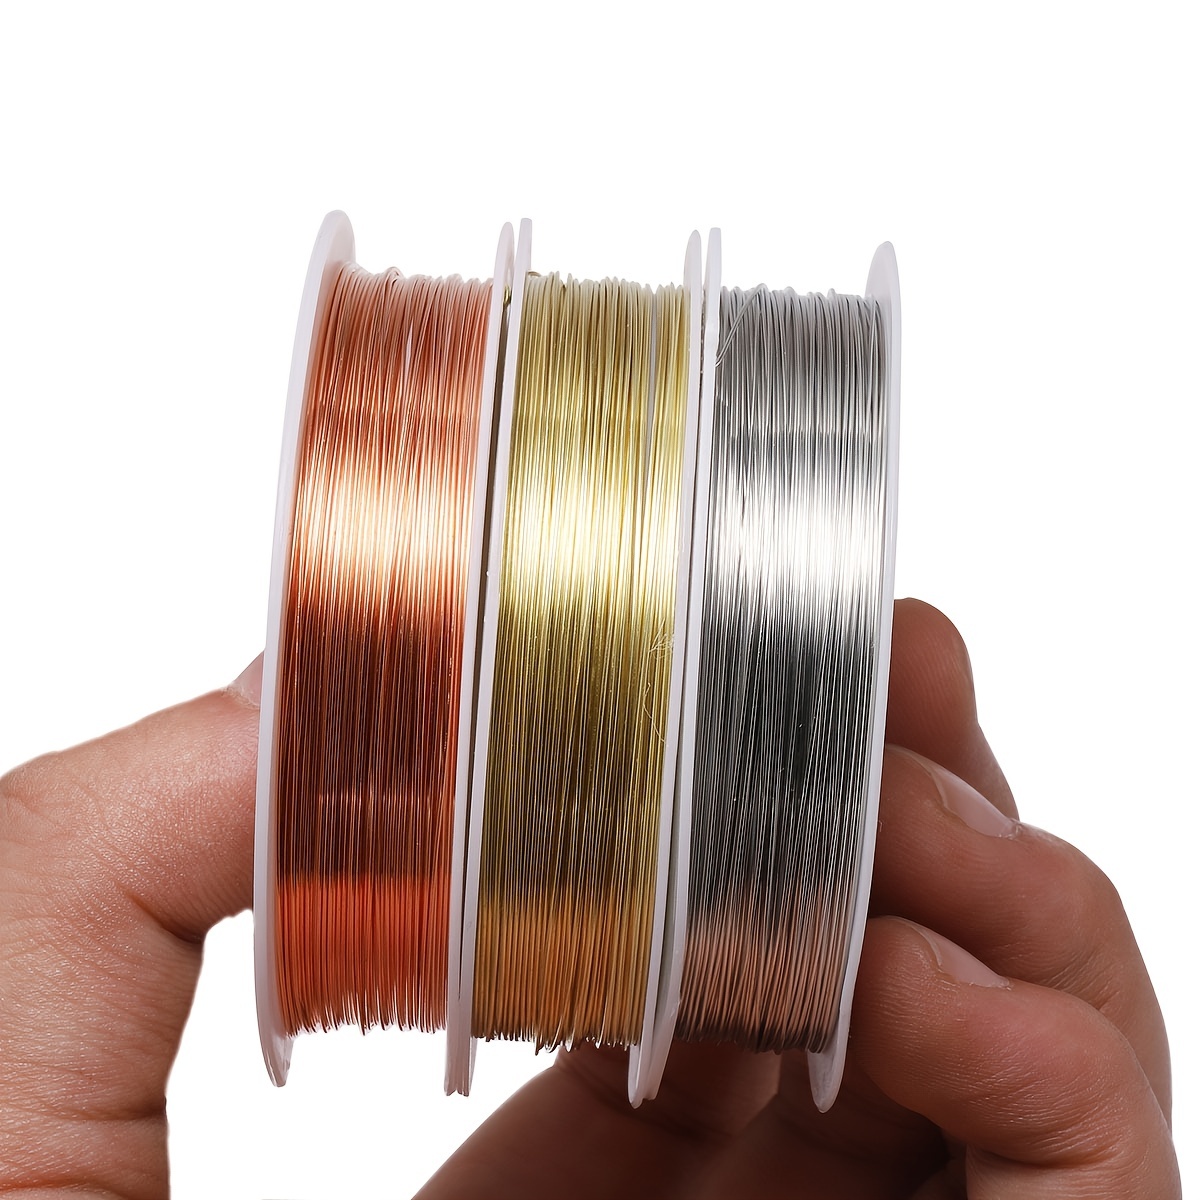 1 Roll Approx 100m Gold Jewelry Beading Wire With 3 Strands For Diy Jewelry  Making